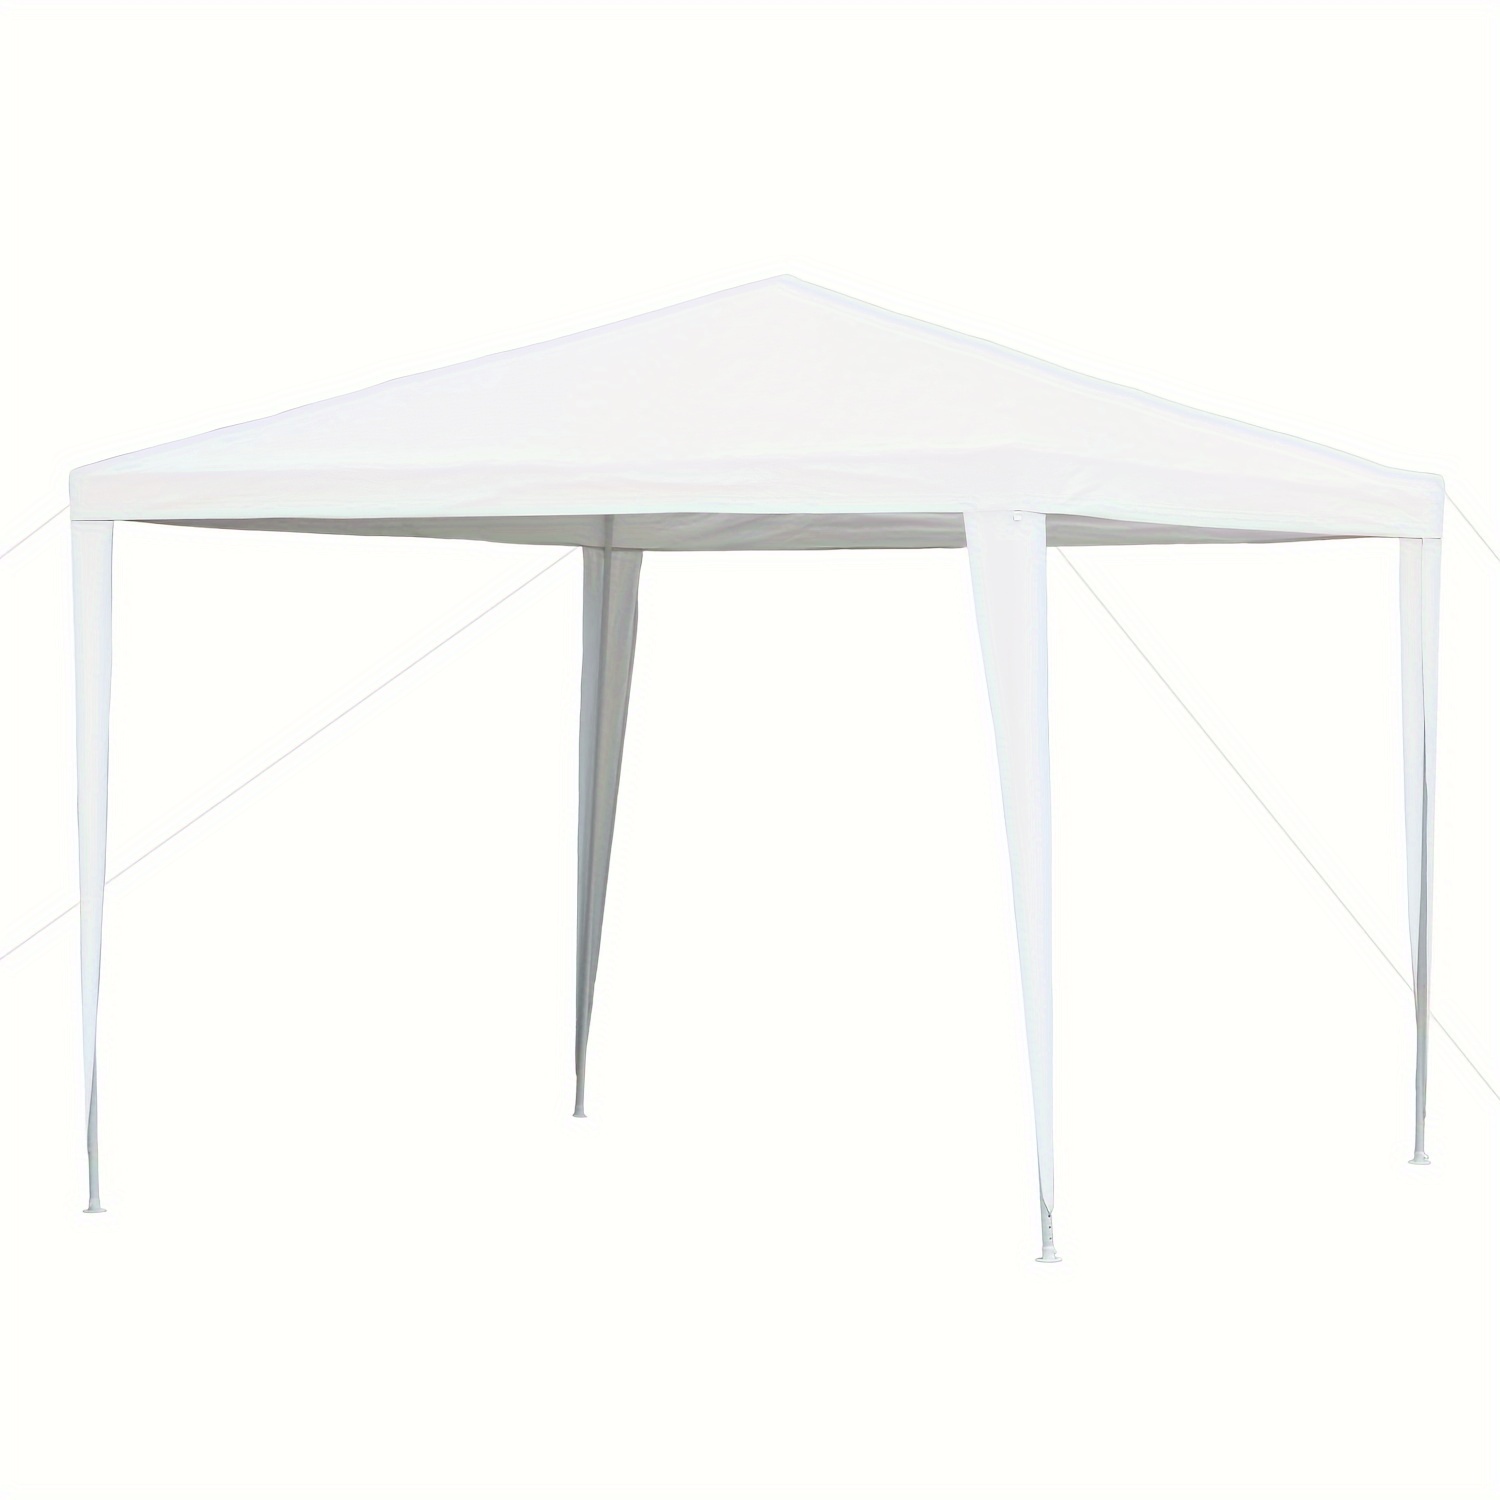 

Outdoor Party Tent, Waterproof Wedding Canopy With Wind Rope, Outdoor Shelter Pavilion For Parties, Commercial Activity, Camping